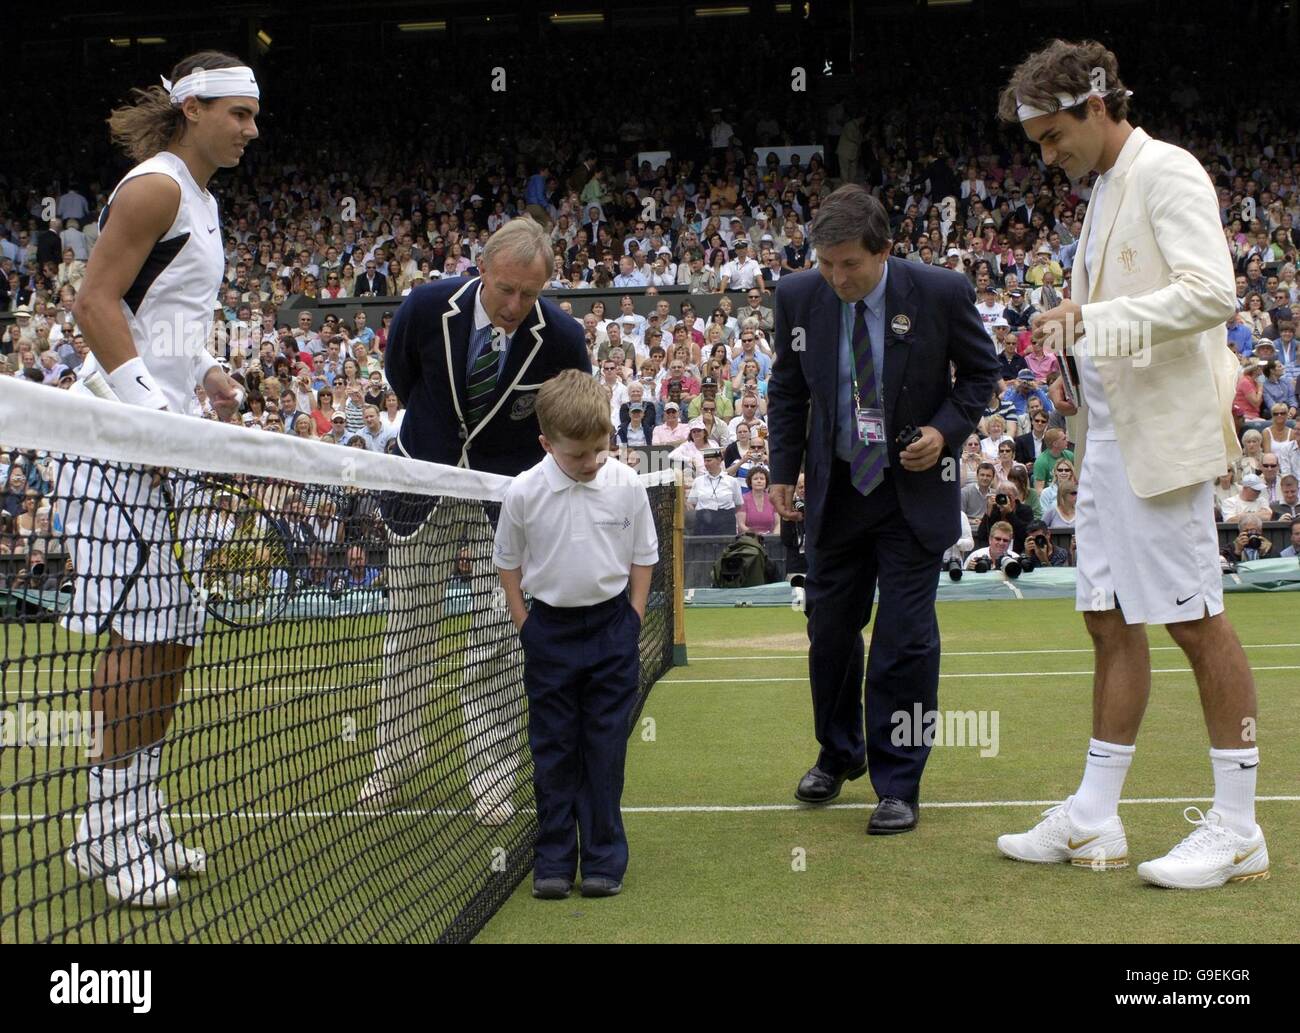 William Caines, seven-years-old, from Beckenham, Kent, represents Cancer Research UK as he performs the coin toss ahead of the Men's singles final match between Switzerland's Roger Federer (right) and Spain's Rafael Nadal (left) during The All England Lawn Tennis Championships at Wimbledon. Stock Photo